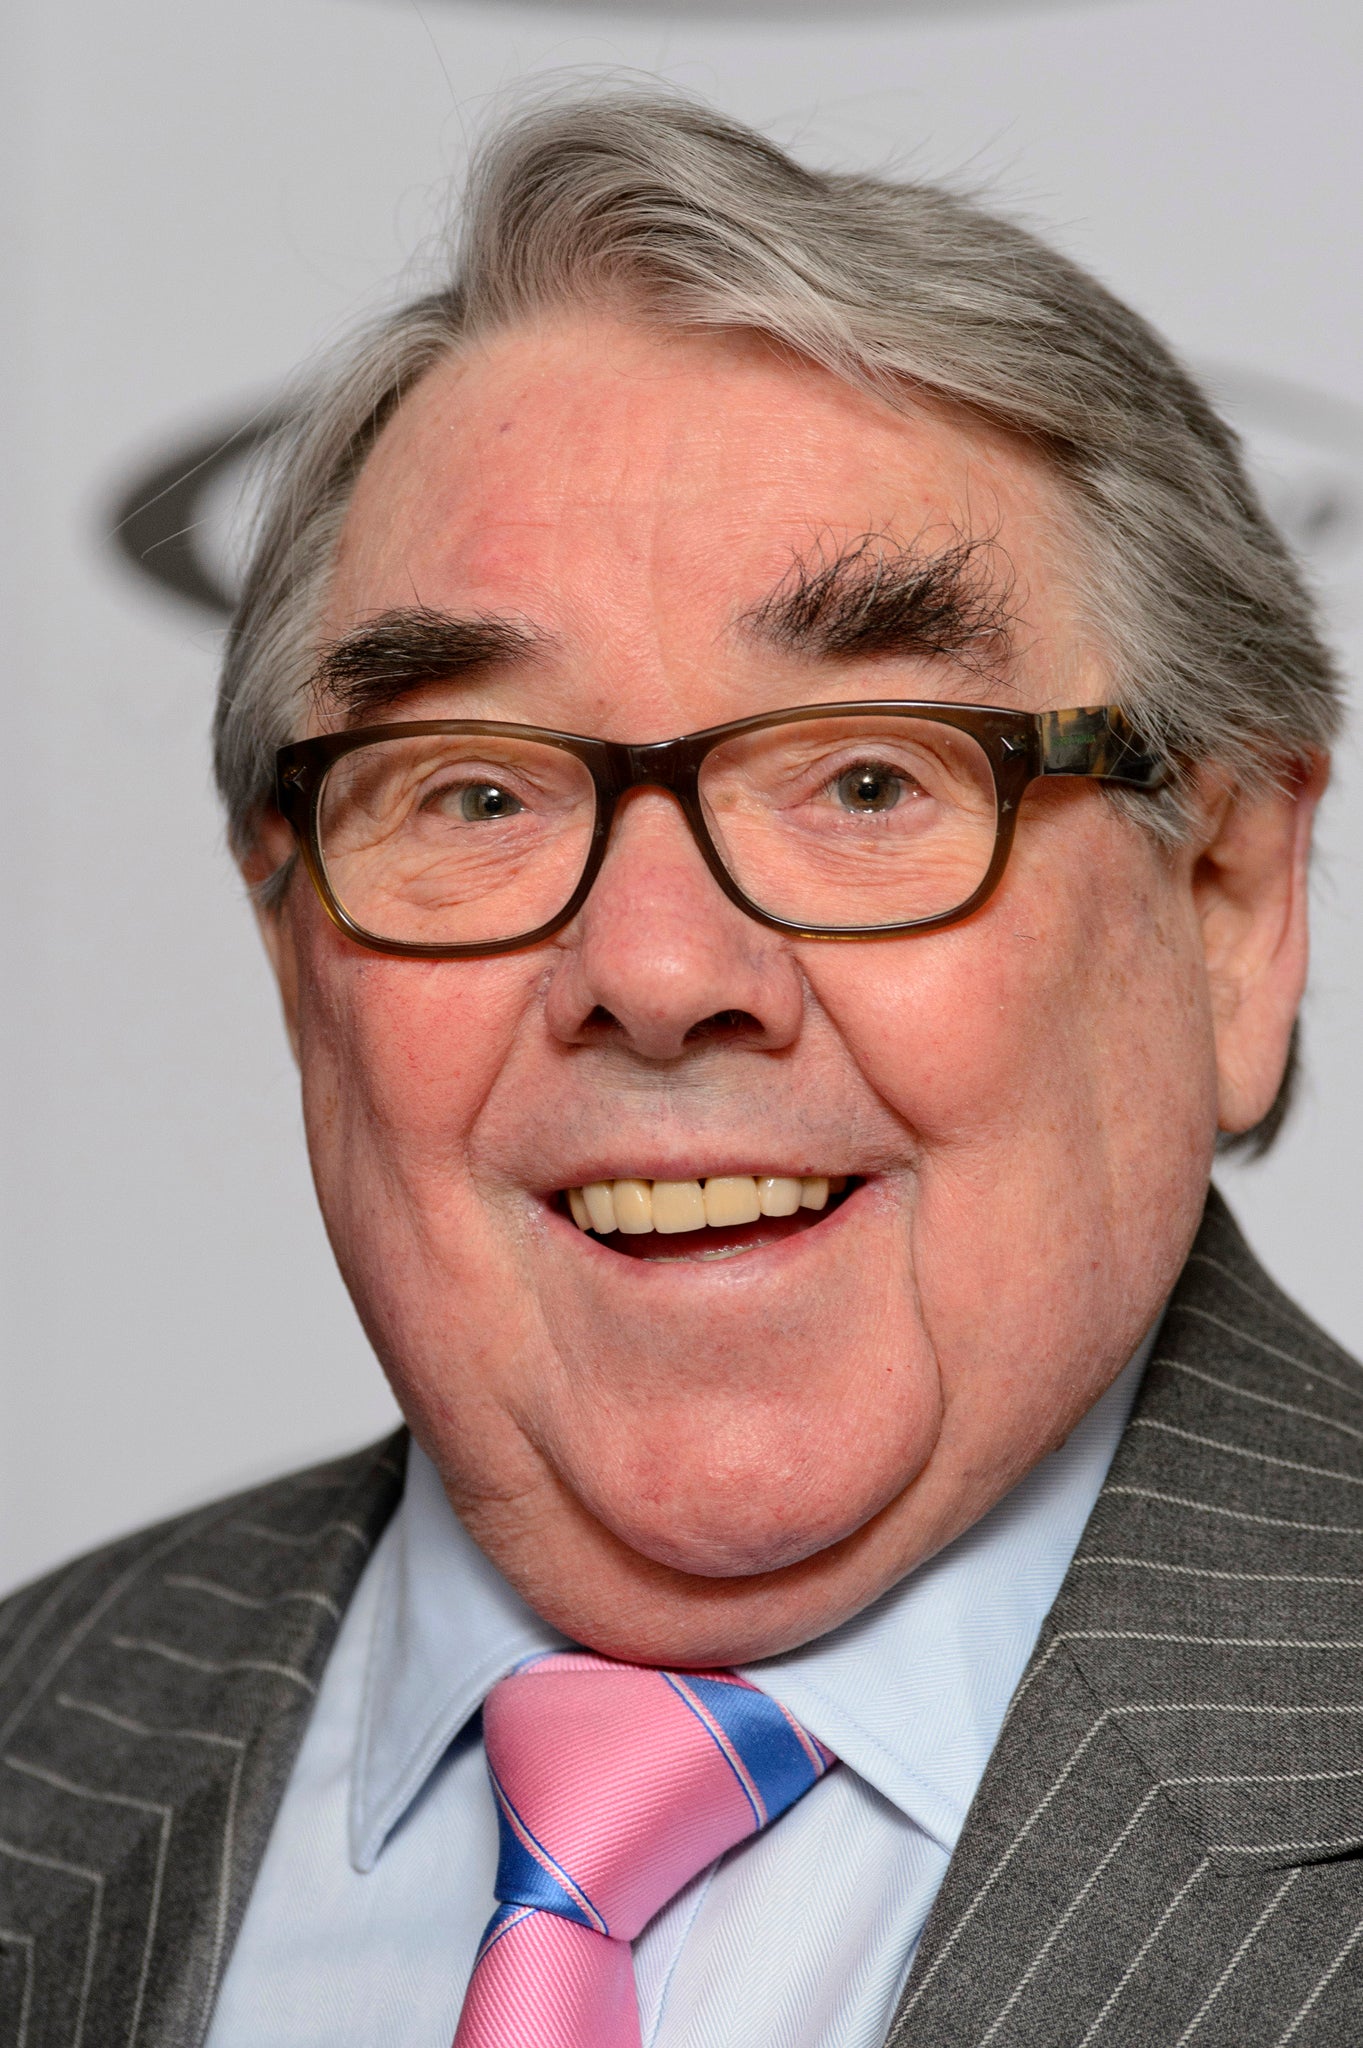 Ronnie Corbett at the Oldie of the Year Awards in London, February 2013. The 82-year-old comedian will return to BBC One this summer to present his own show Ronnie's Pedigree Pals